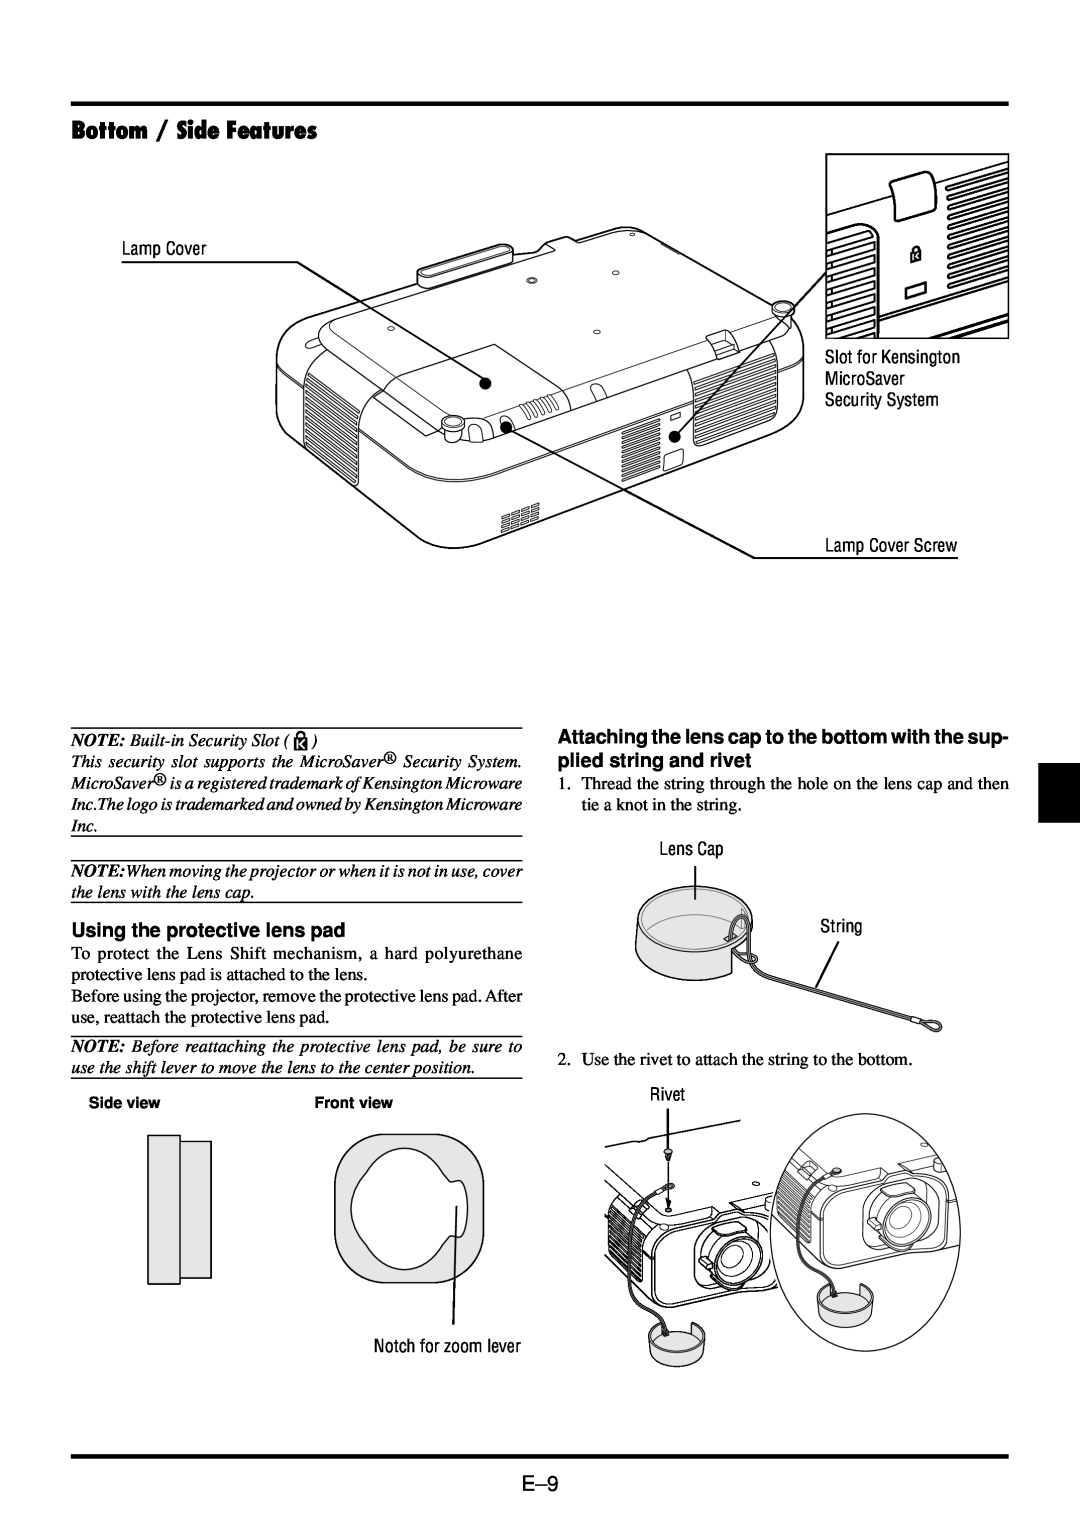 NEC VT45 user manual Bottom / Side Features, Using the protective lens pad 